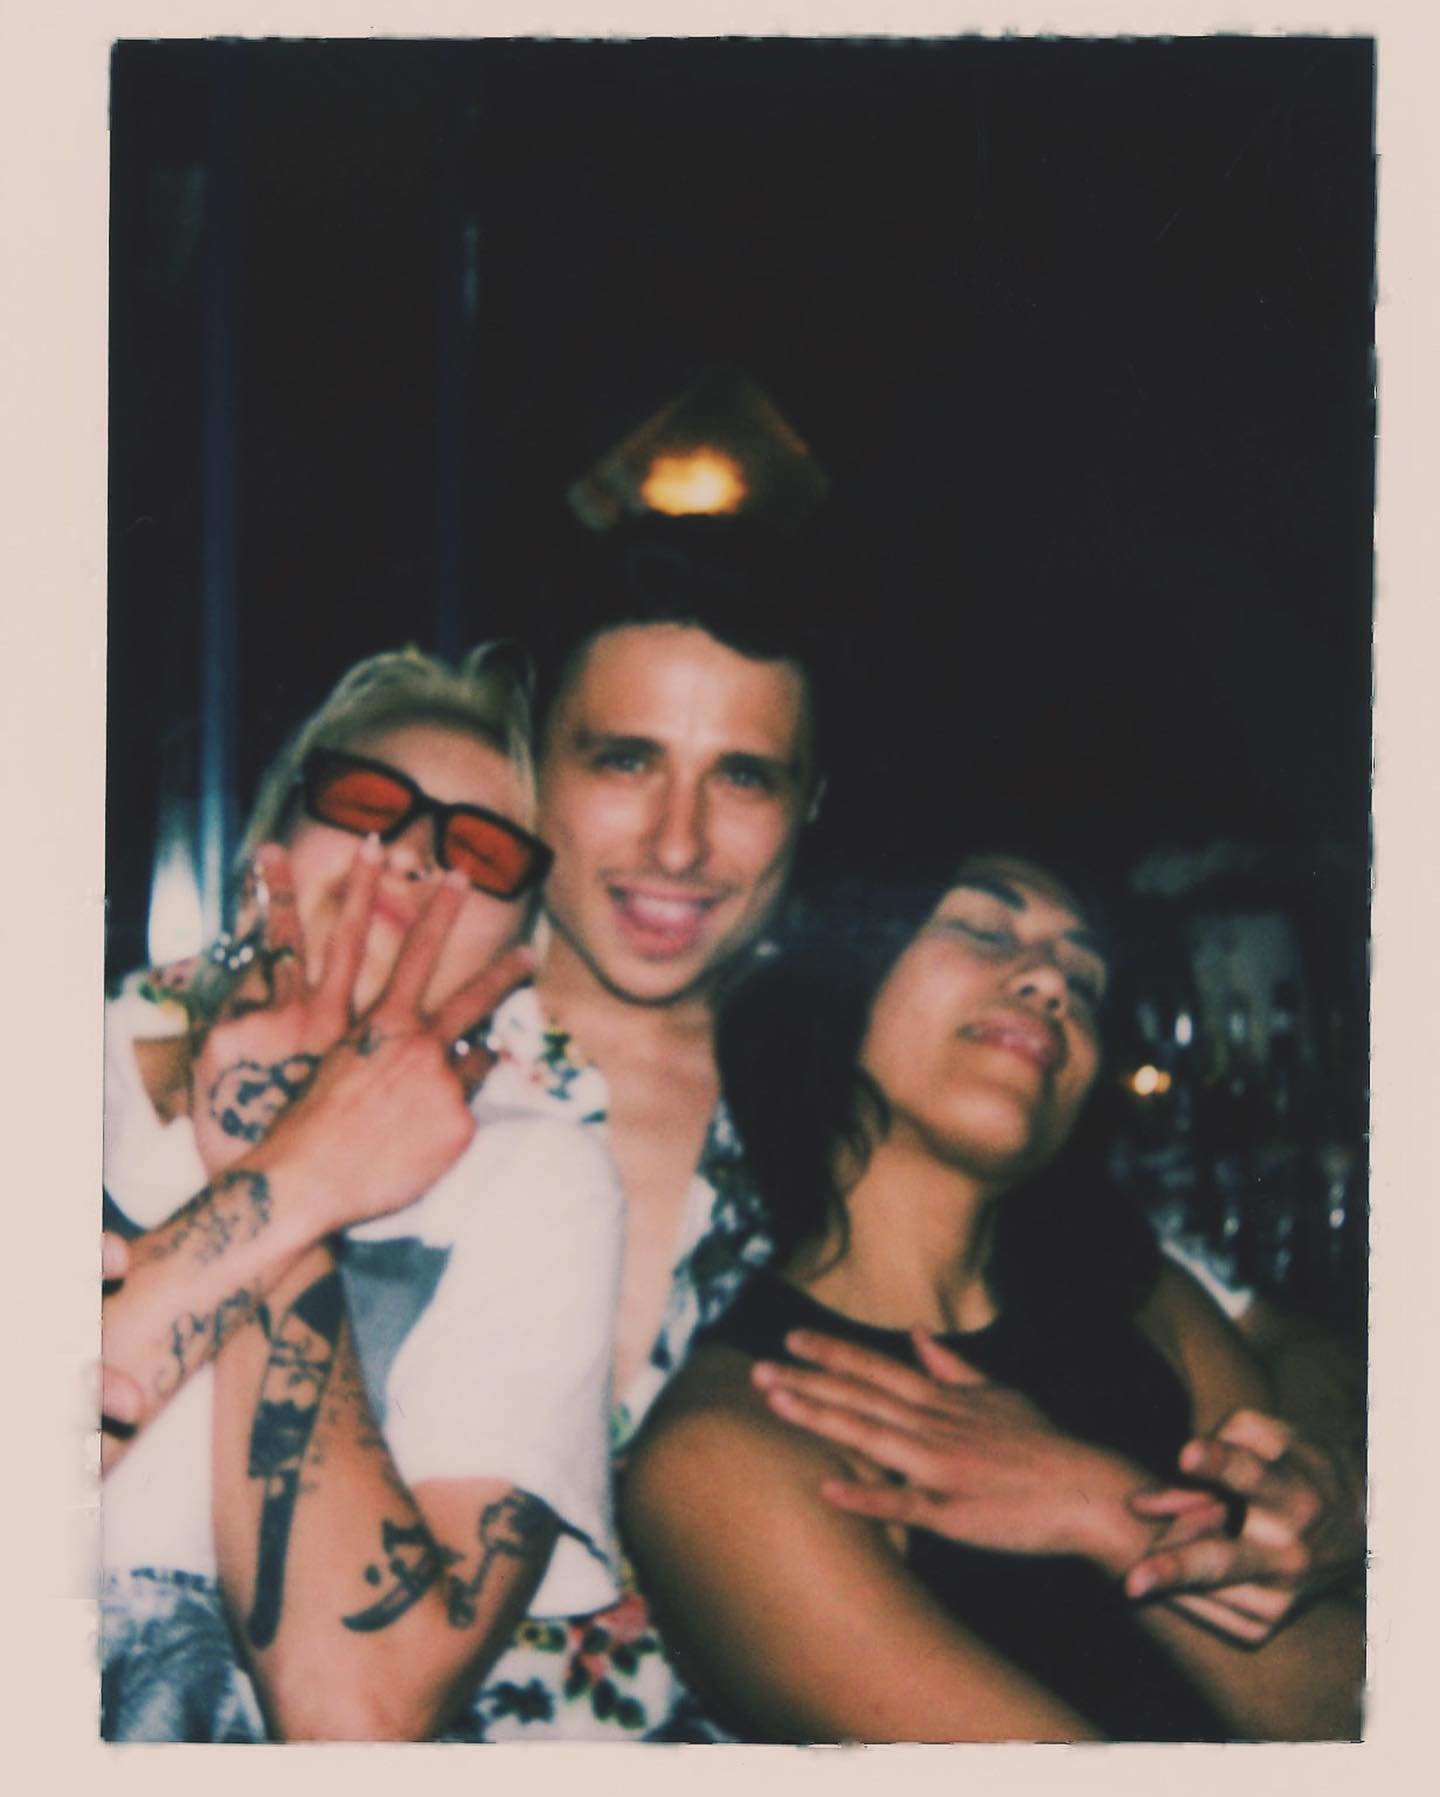 &bull;ᴗ&bull;

we love our small &amp; mighty crew 🍯 closed tonight for a private party. 

see you next week ✌🏽

❤︎₊ ⊹ polaroid by: @ohheybert